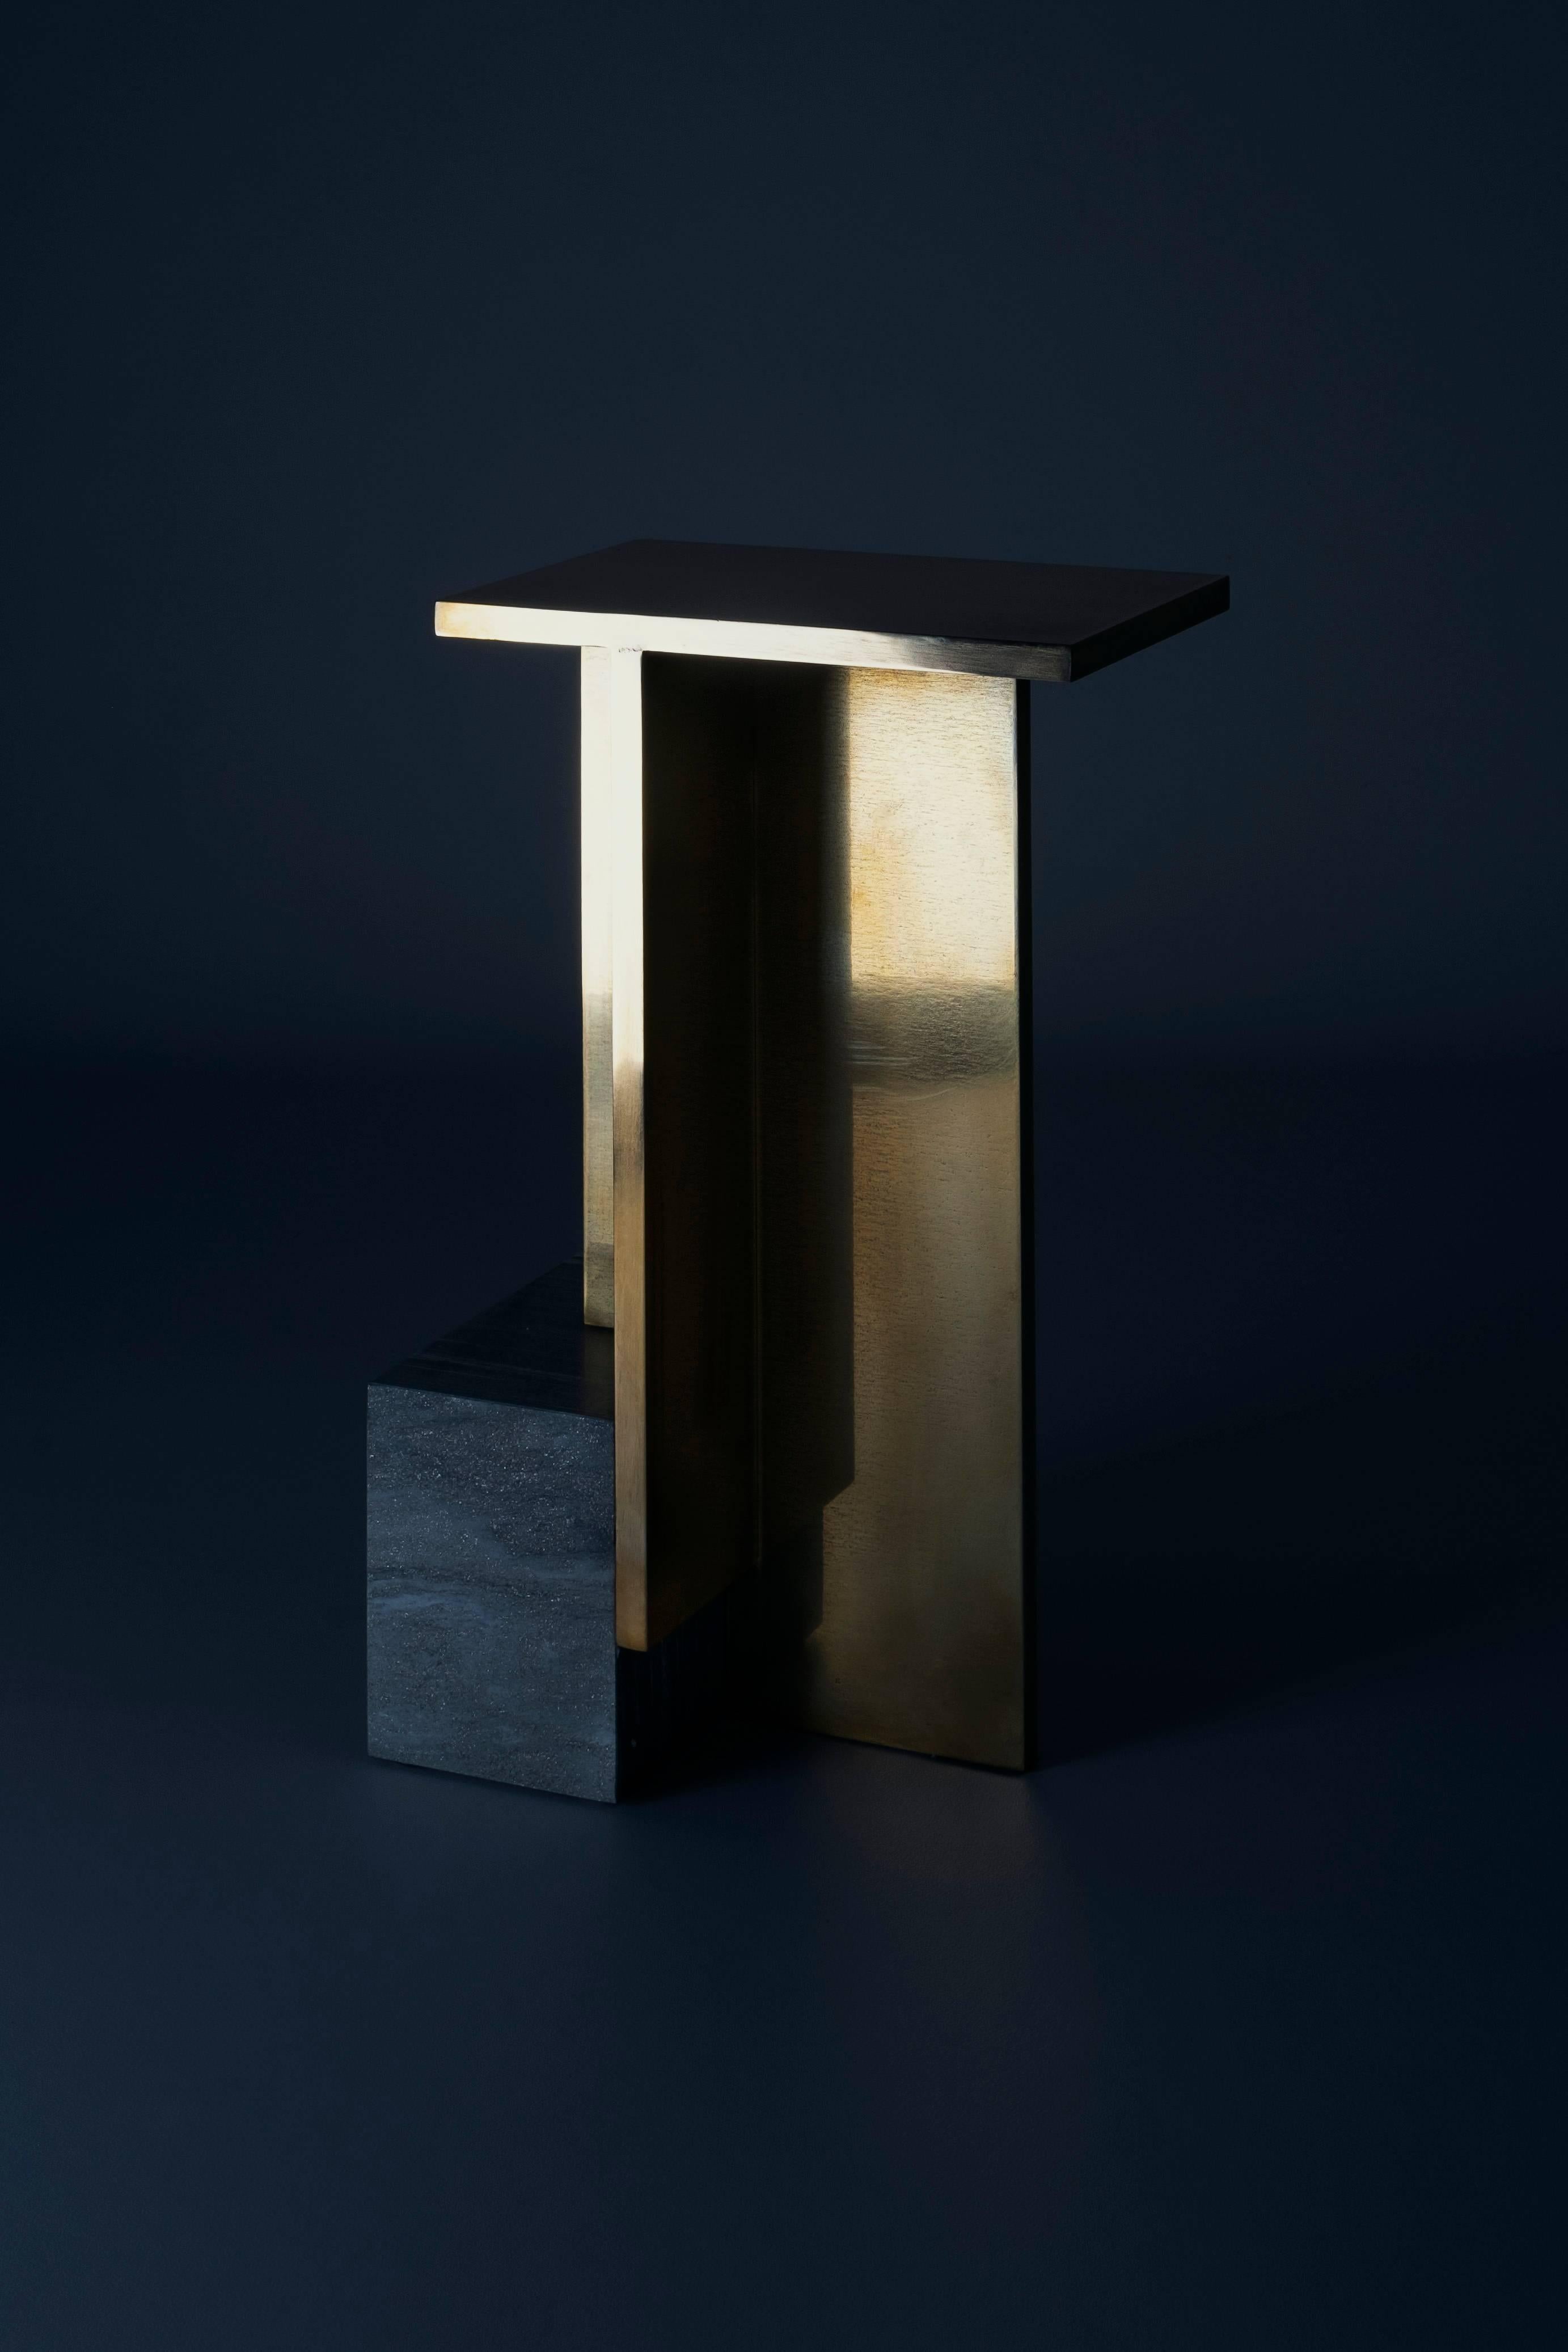 IF Table V
Marble and brass
Measure: H 55 x L 19 x W 30 cm
Edition: 8P + 2AP

The collection ‘Further From Function’ includes seven subtle variations
of a small table ‘IF’ and a limited edition of a sculptural side table ‘KEPT’.
Produced in